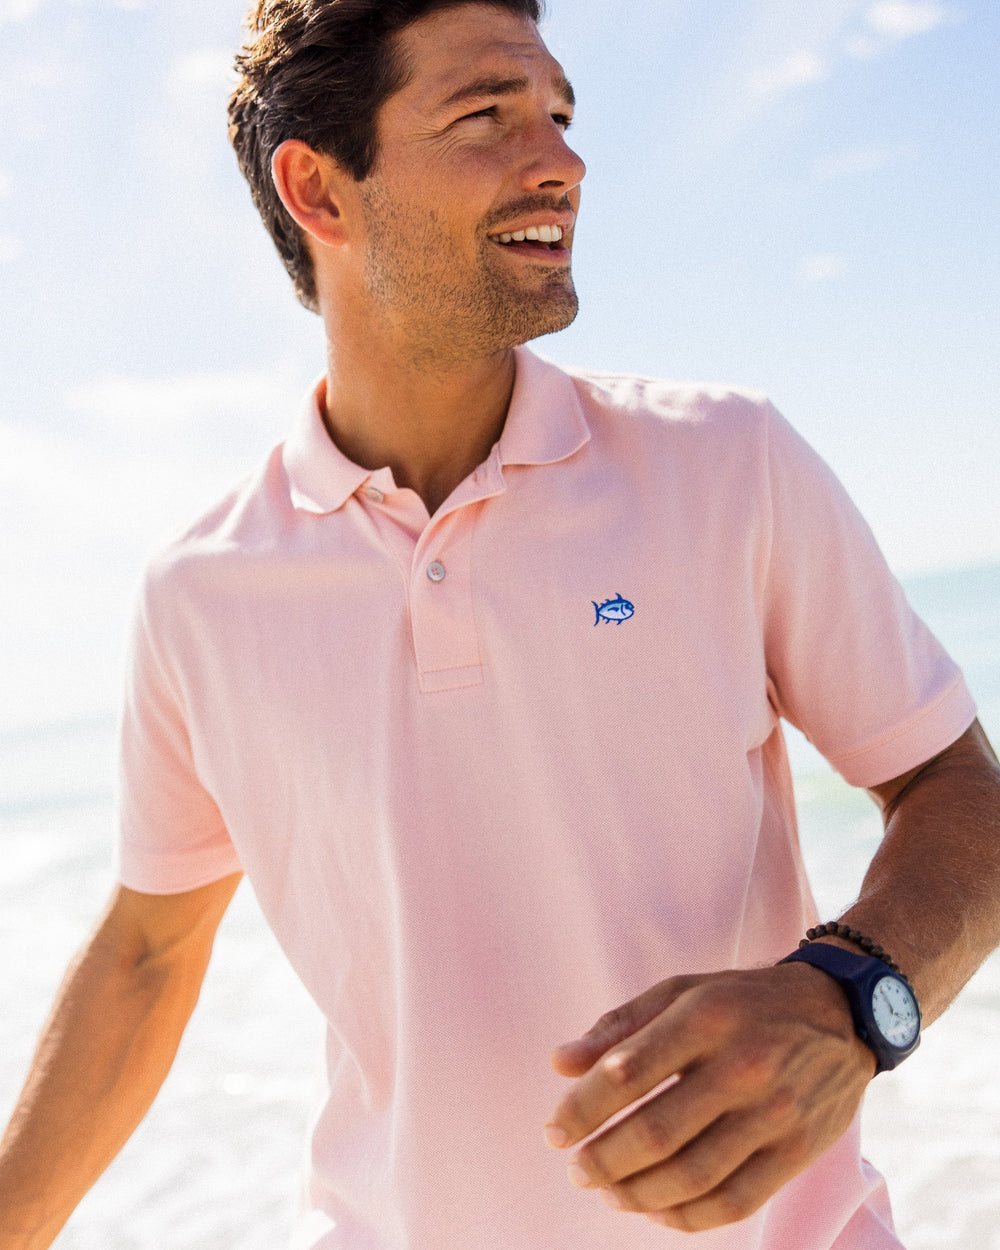 The model lifestyle view of the Men's New Skipjack Polo Shirt by Southern Tide - Light Pink